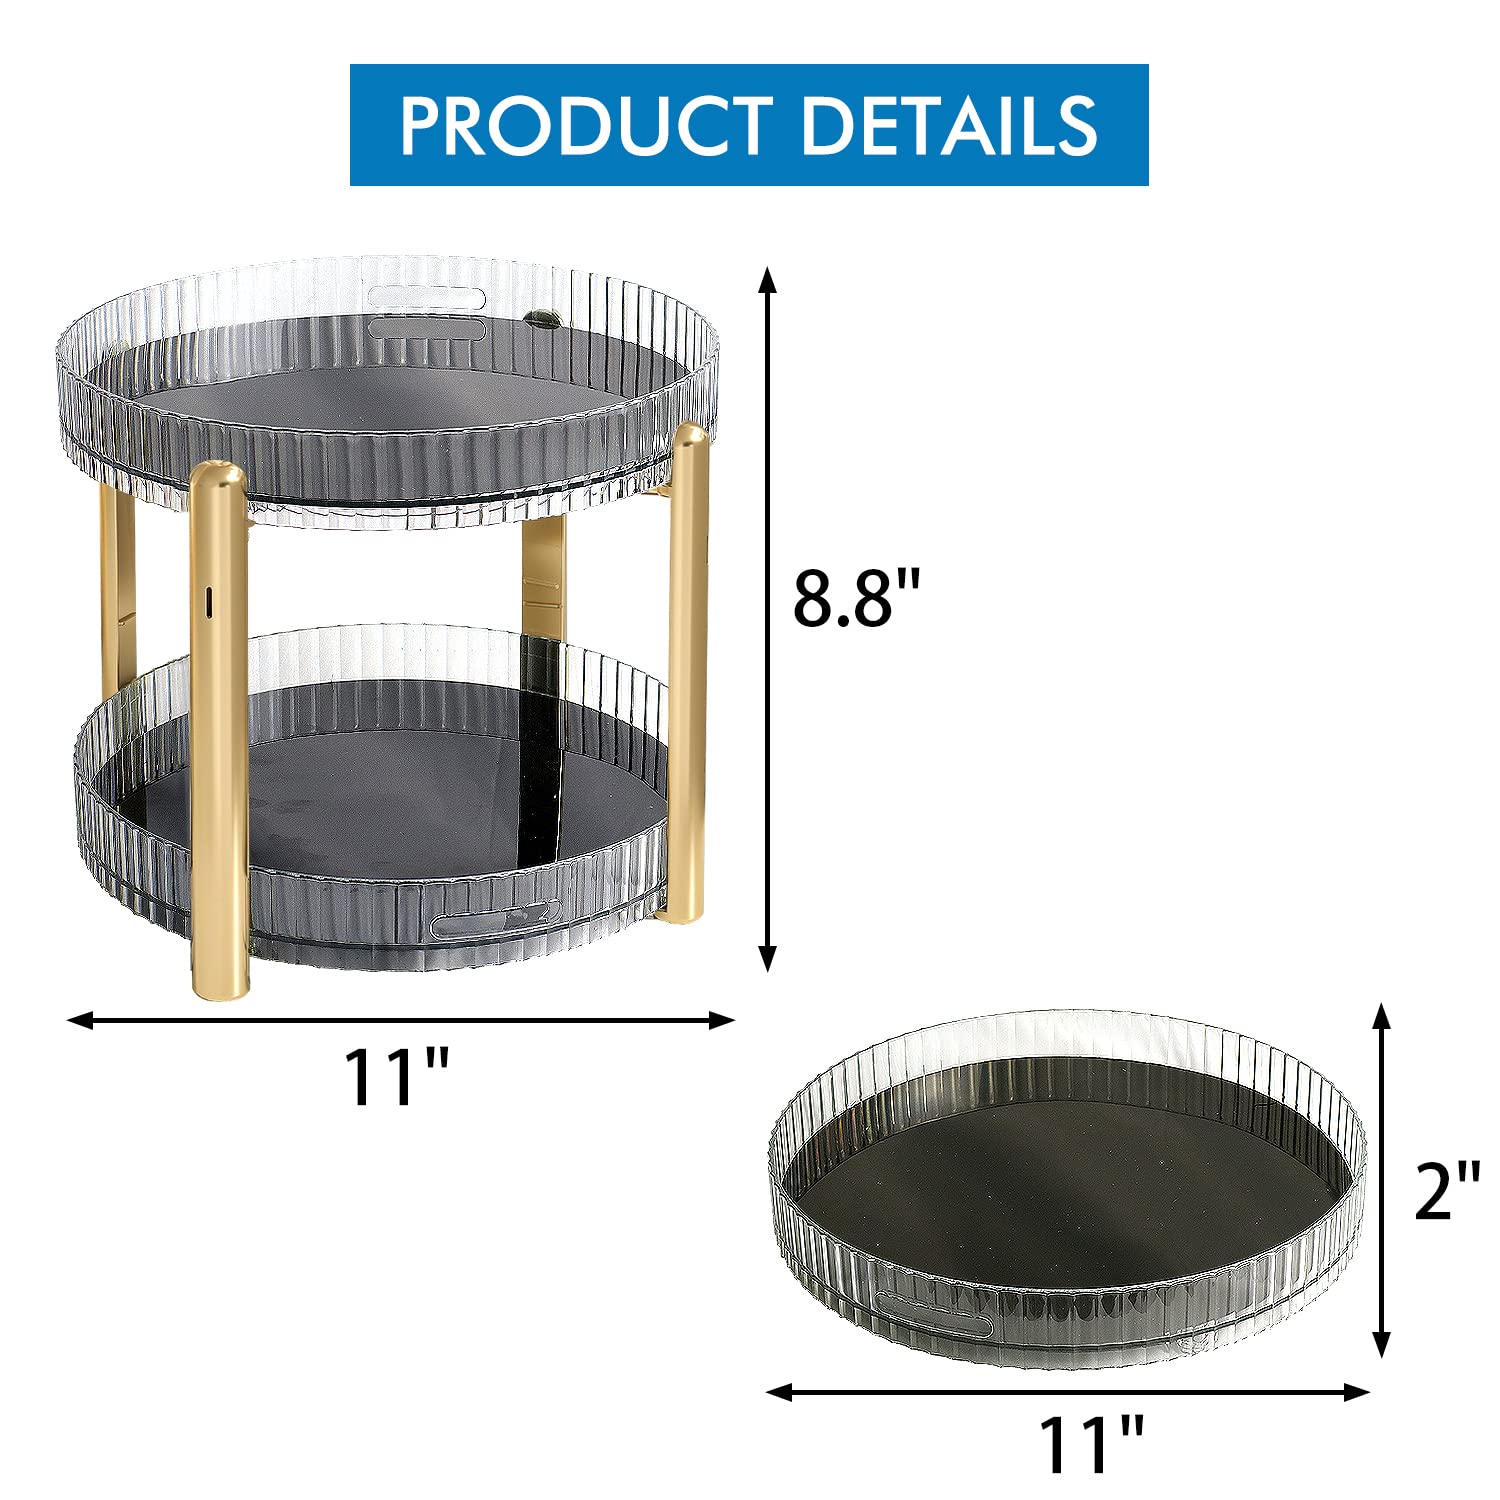 2 Tier Lazy Susan,FIROK 360 Degree Rotating Storage Skincare Organizers for Kitchen,Cabinet,Bathroom, Non-Skid Large Capacity Acrylic Turntable Spinning Rack Cosmetics Organizer